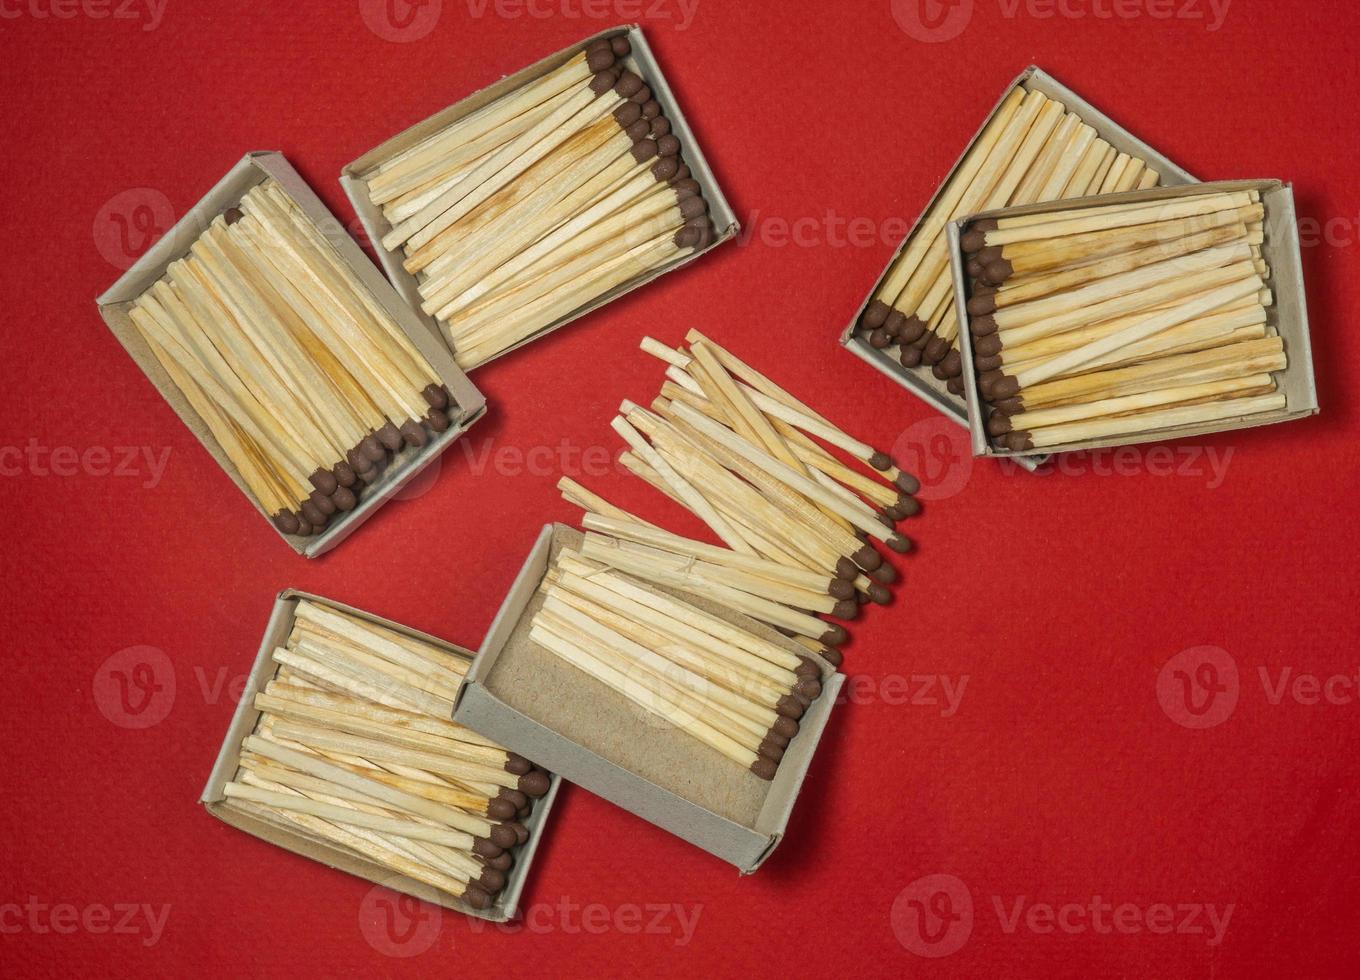 Matchsticks  on a red background. Safe handling of fire. Fire dangers. Lots of matches.  still life. Matchsticks  boxes photo